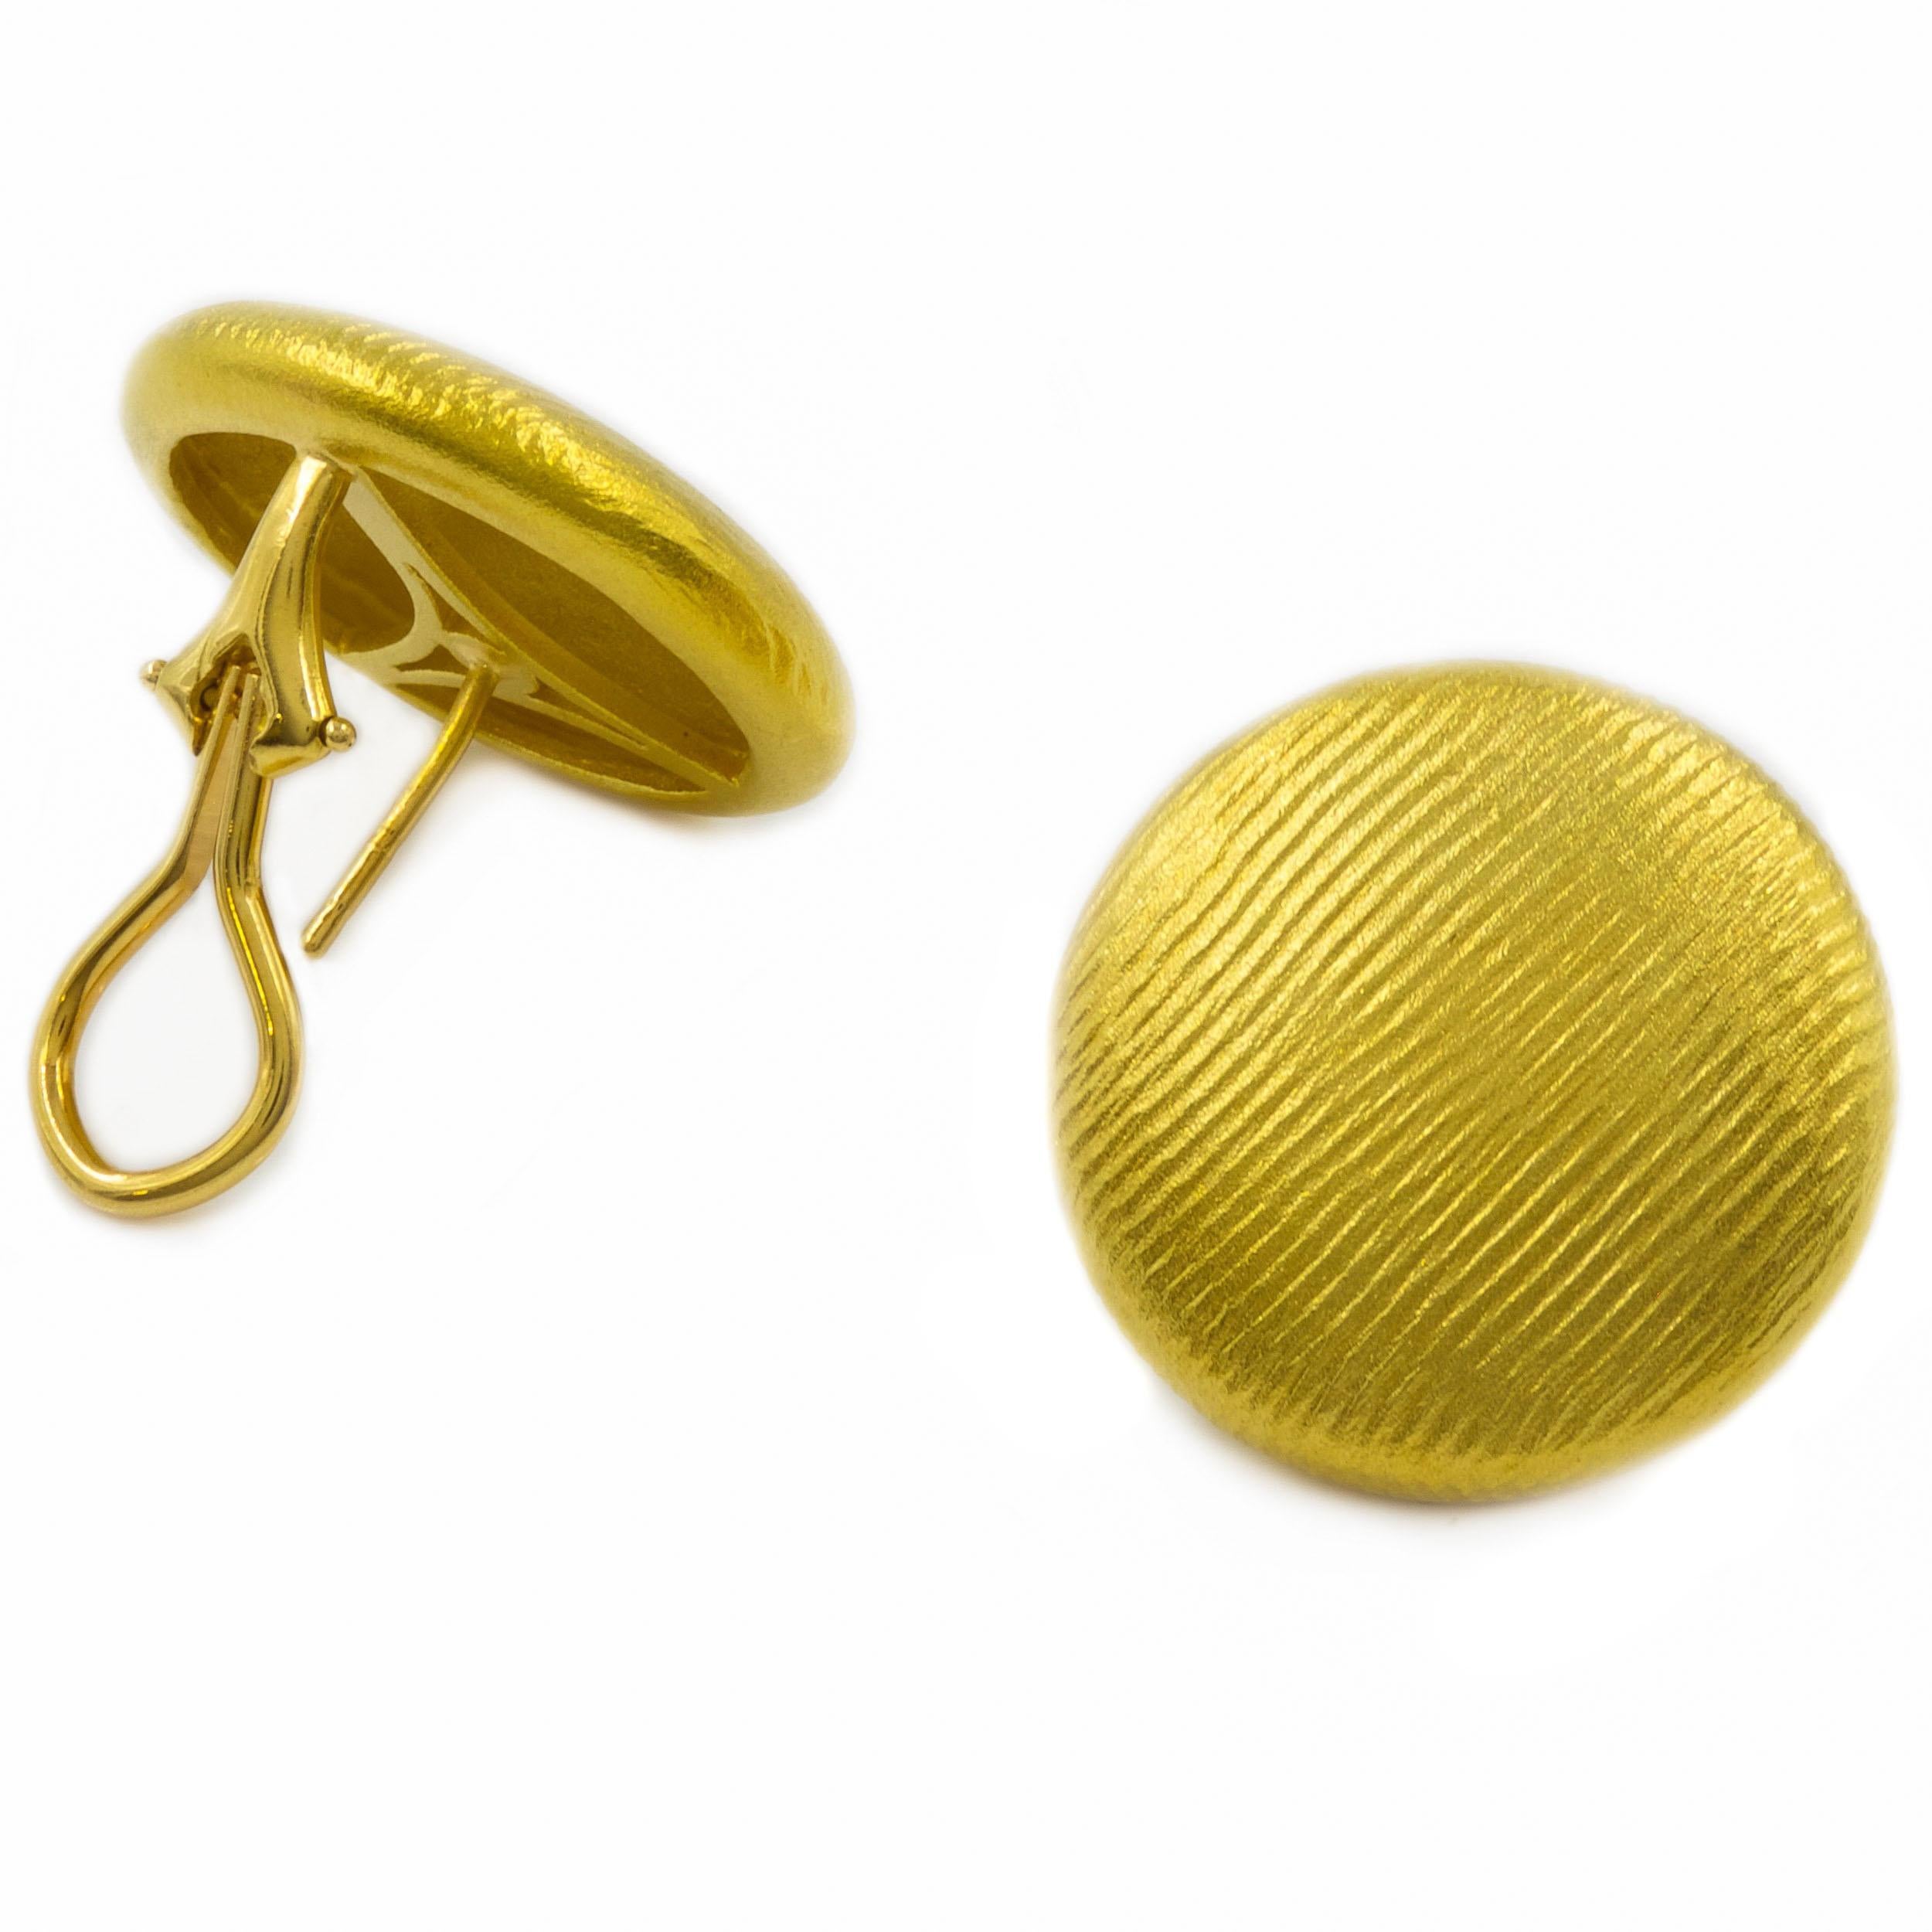 RIBBED AND TEXTURED 18K YELLOW GOLD CIRCULAR EARRINGS
Paul Morelli, a retired design circa 2000s, stamped verso 